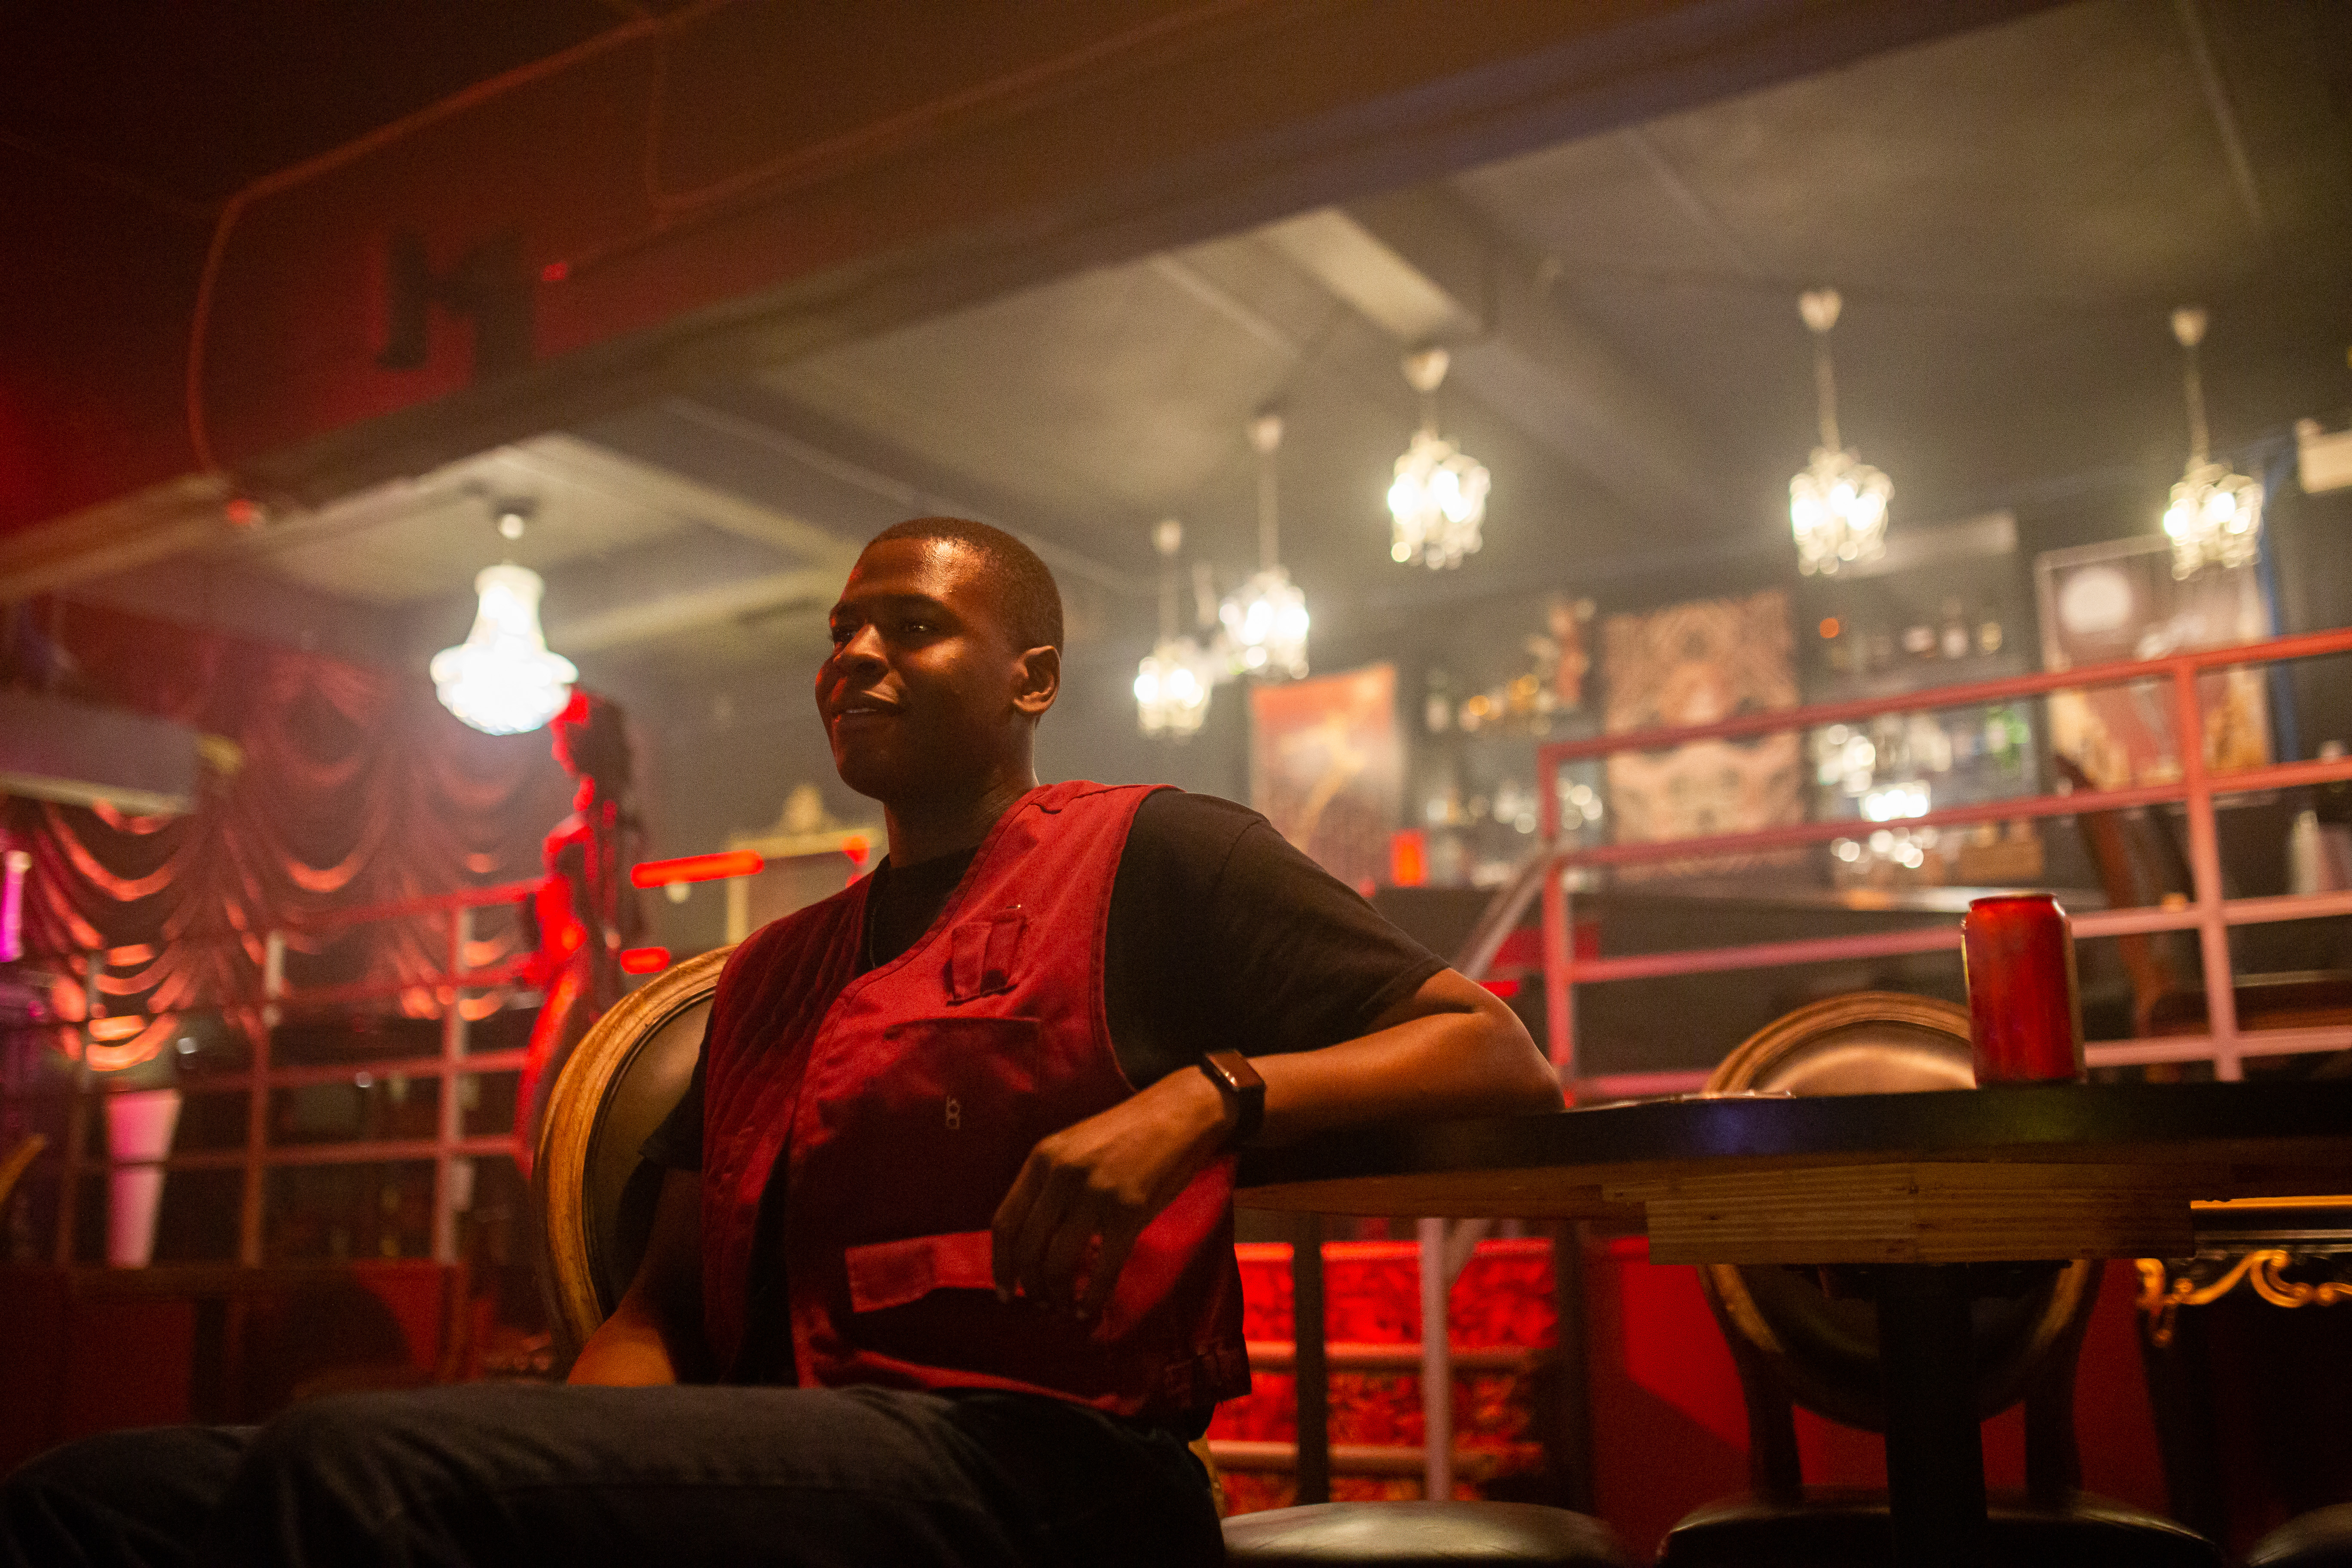 Man sitting at a bar wearing a red vest in moody lighting